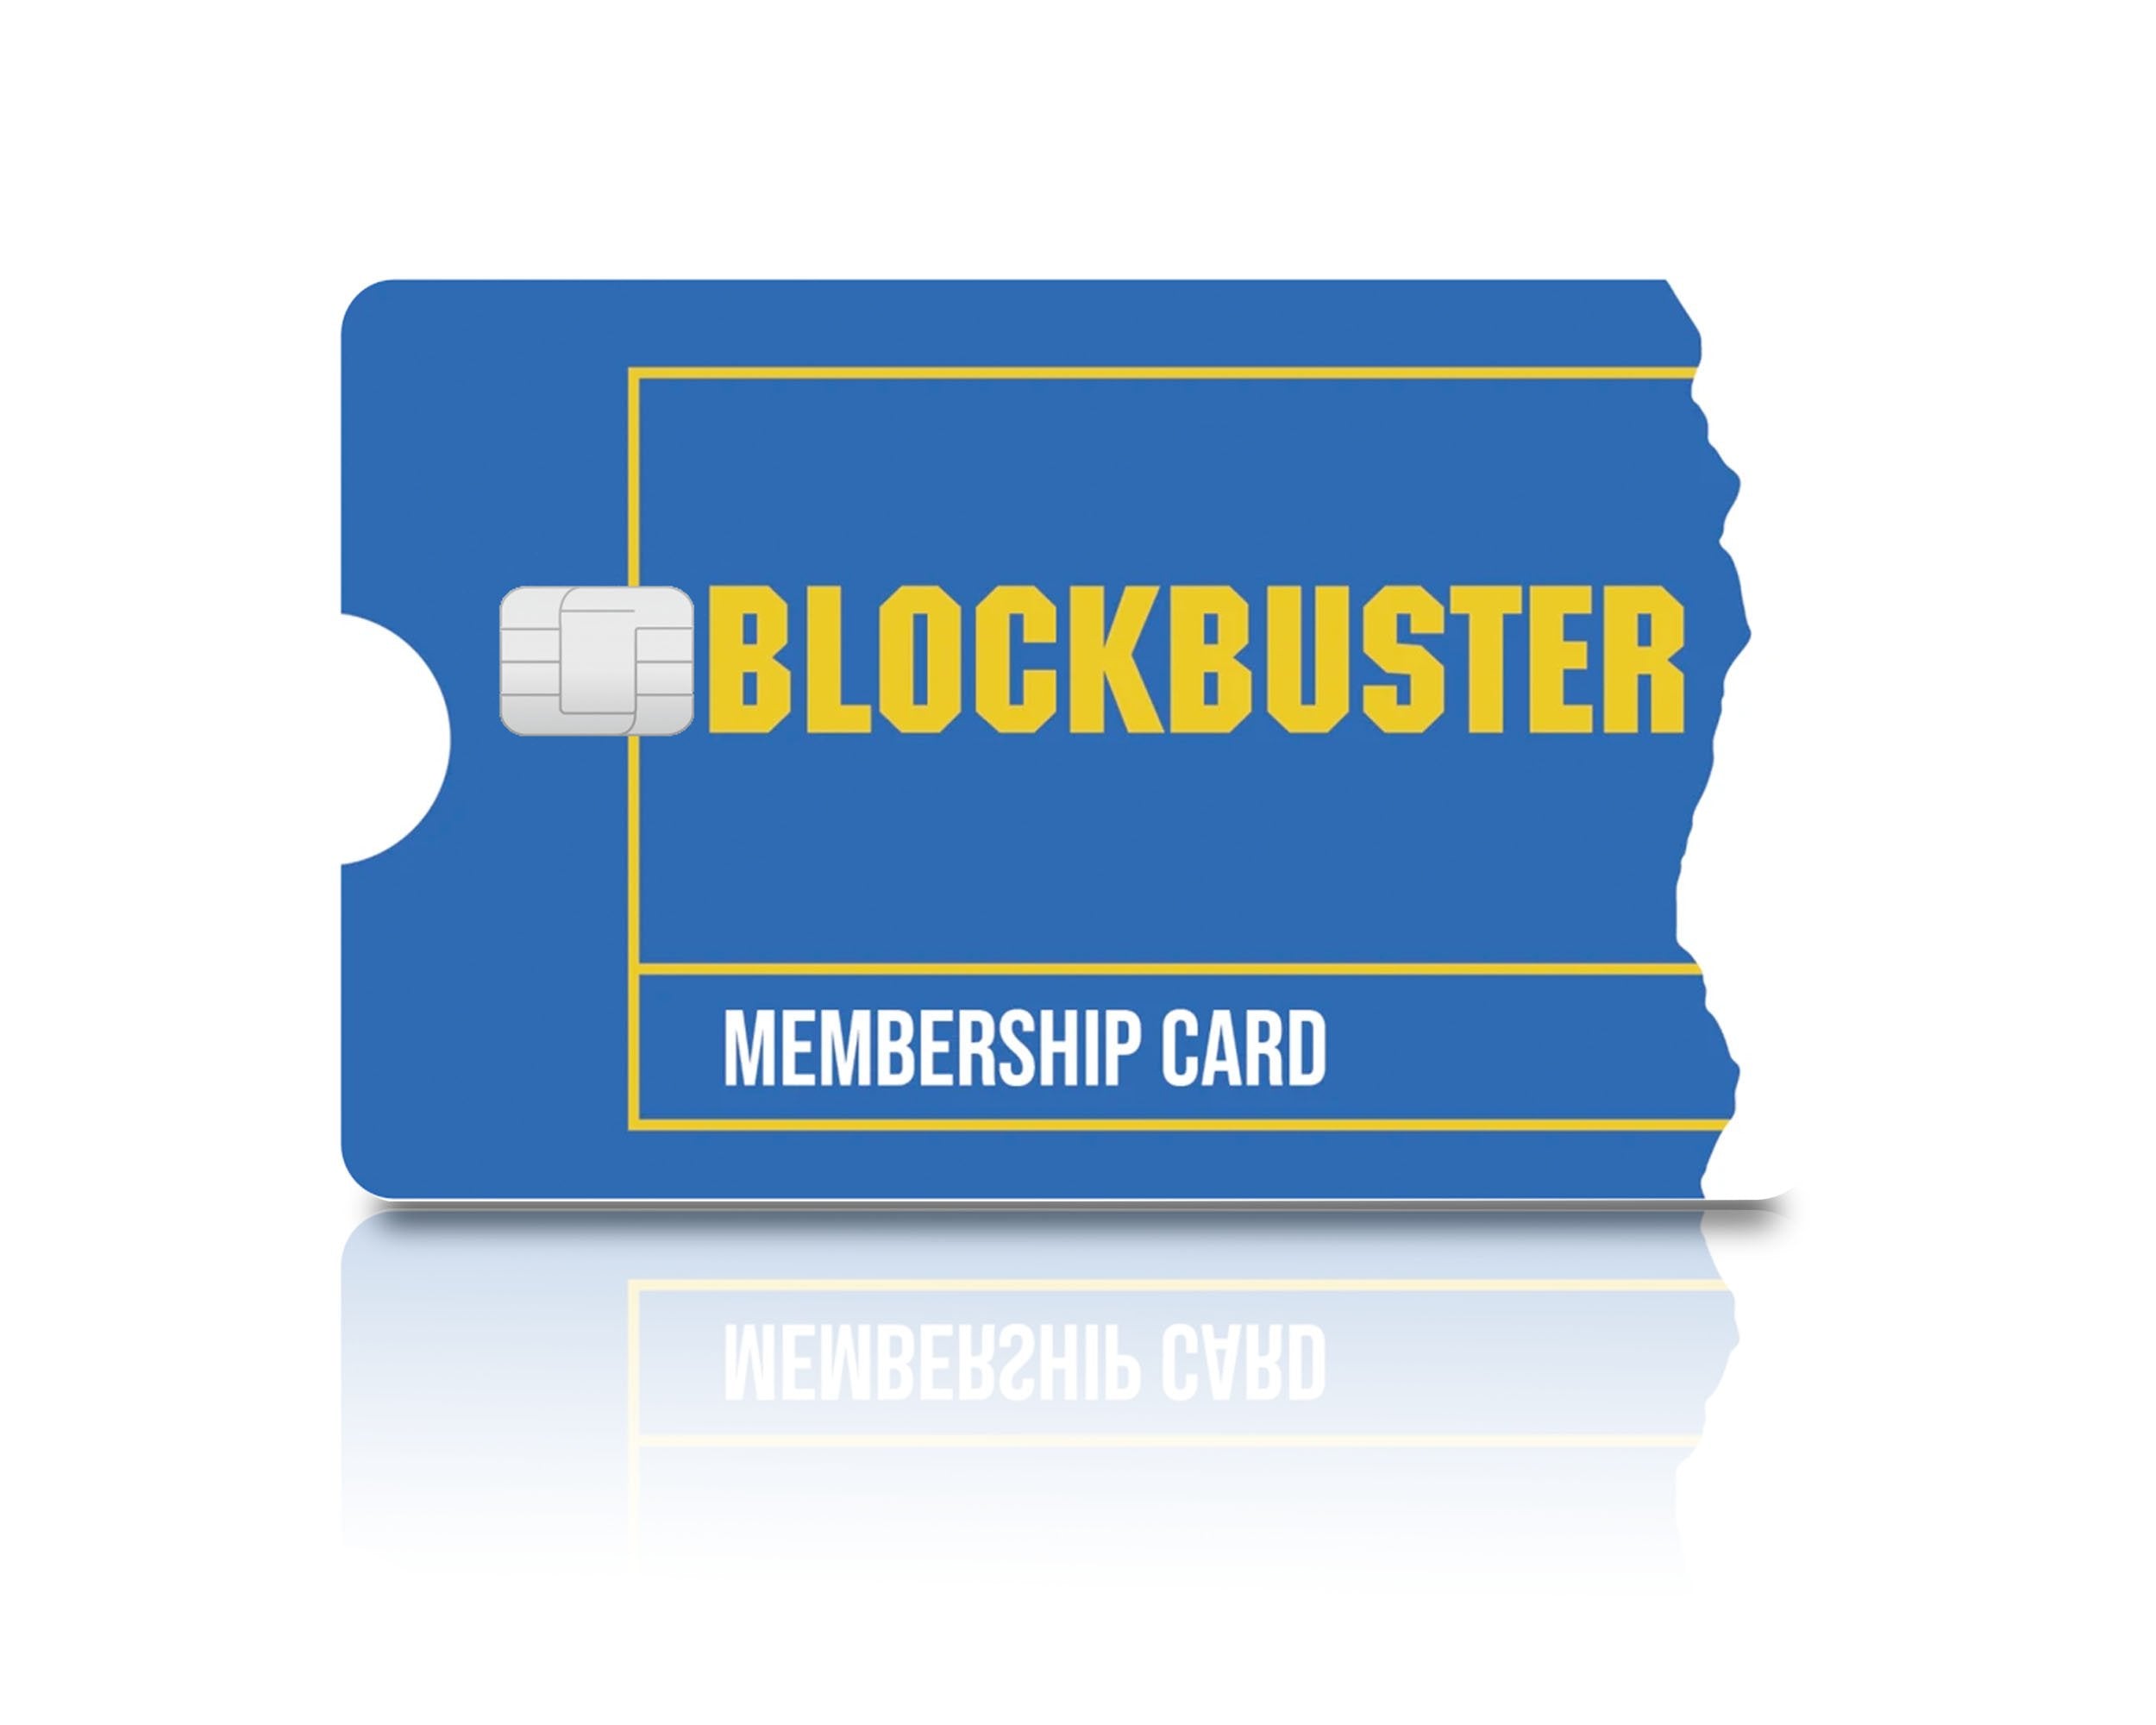 This Credit Card Skin Turns Your Card Into a Blockbuster Membership Card